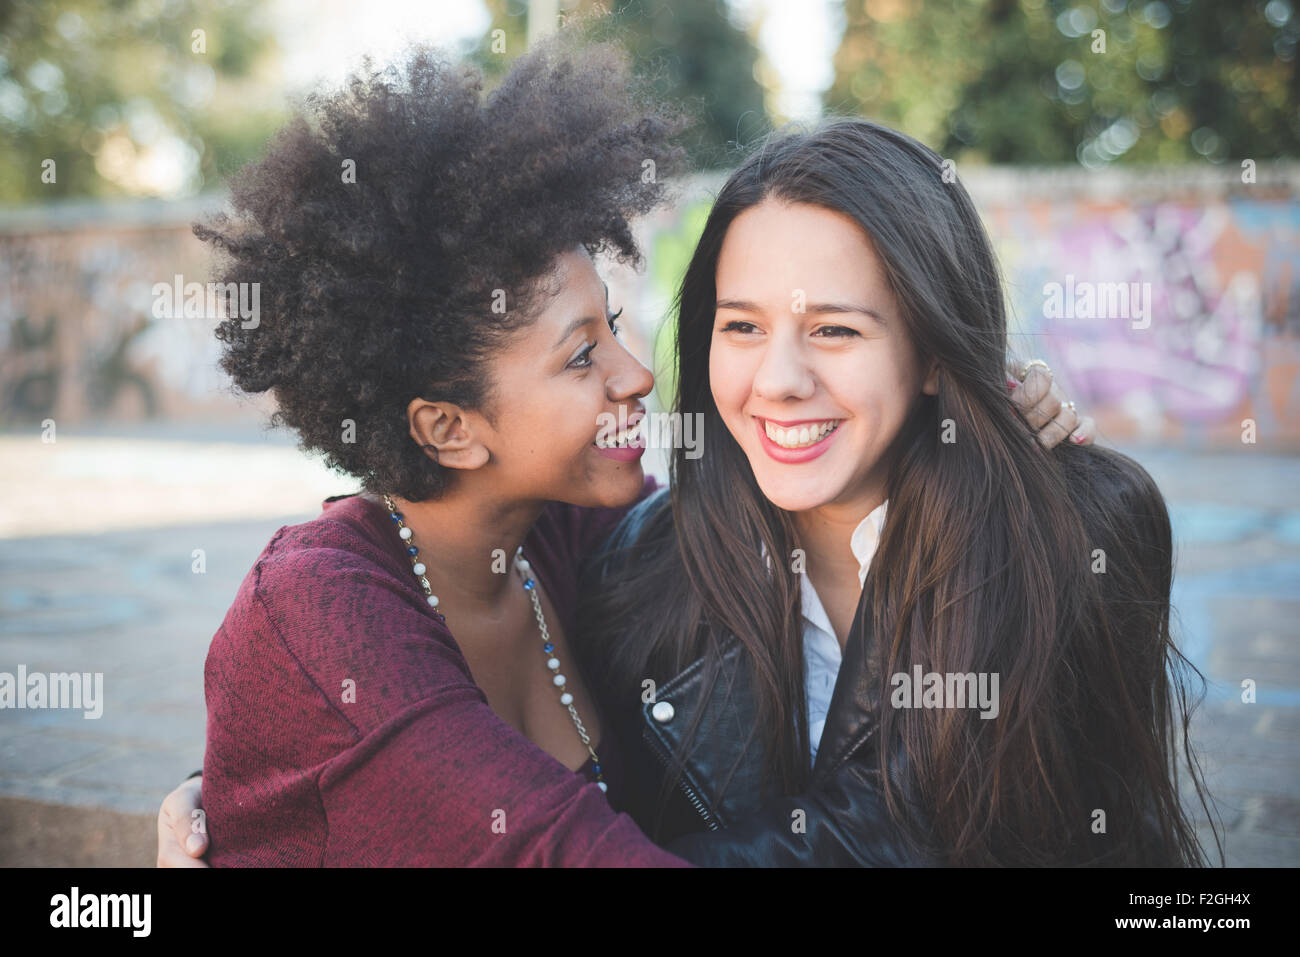 Two Black Women Hugging Each Other Stock Photos & Two Black Women ...